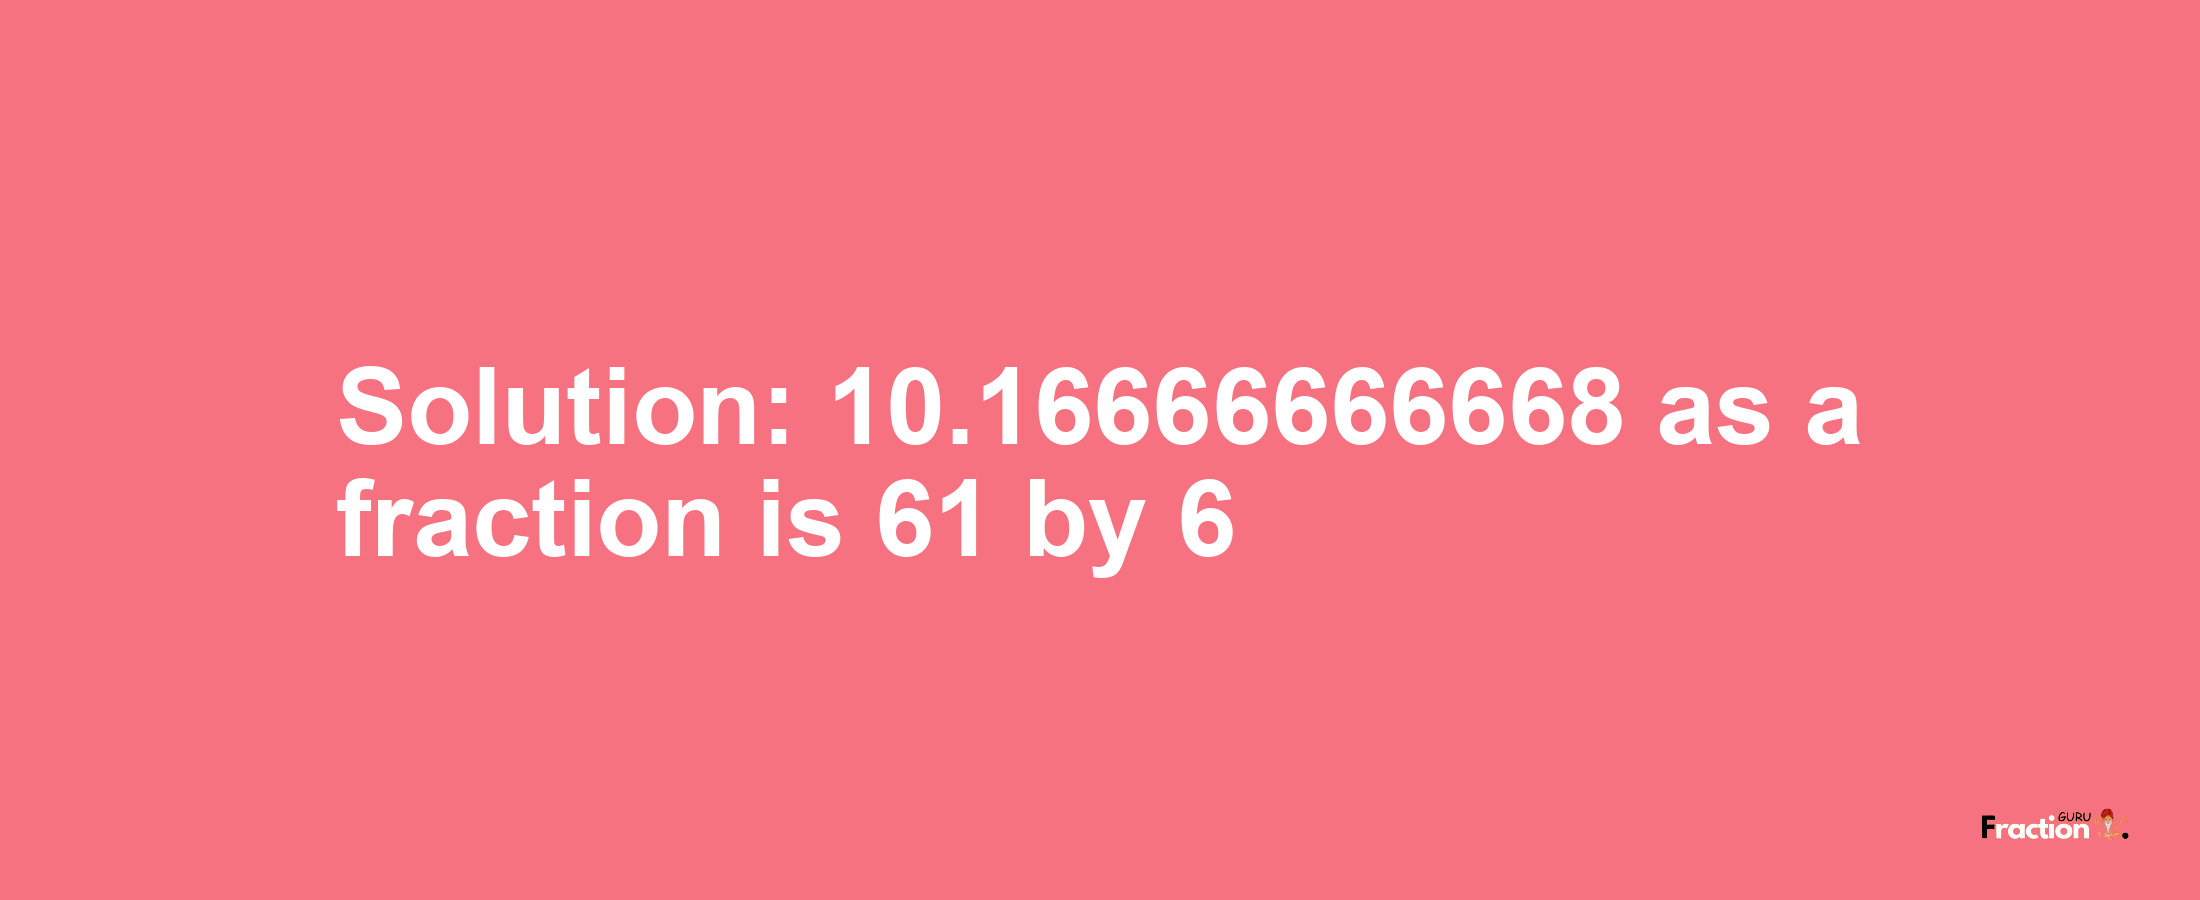 Solution:10.16666666668 as a fraction is 61/6